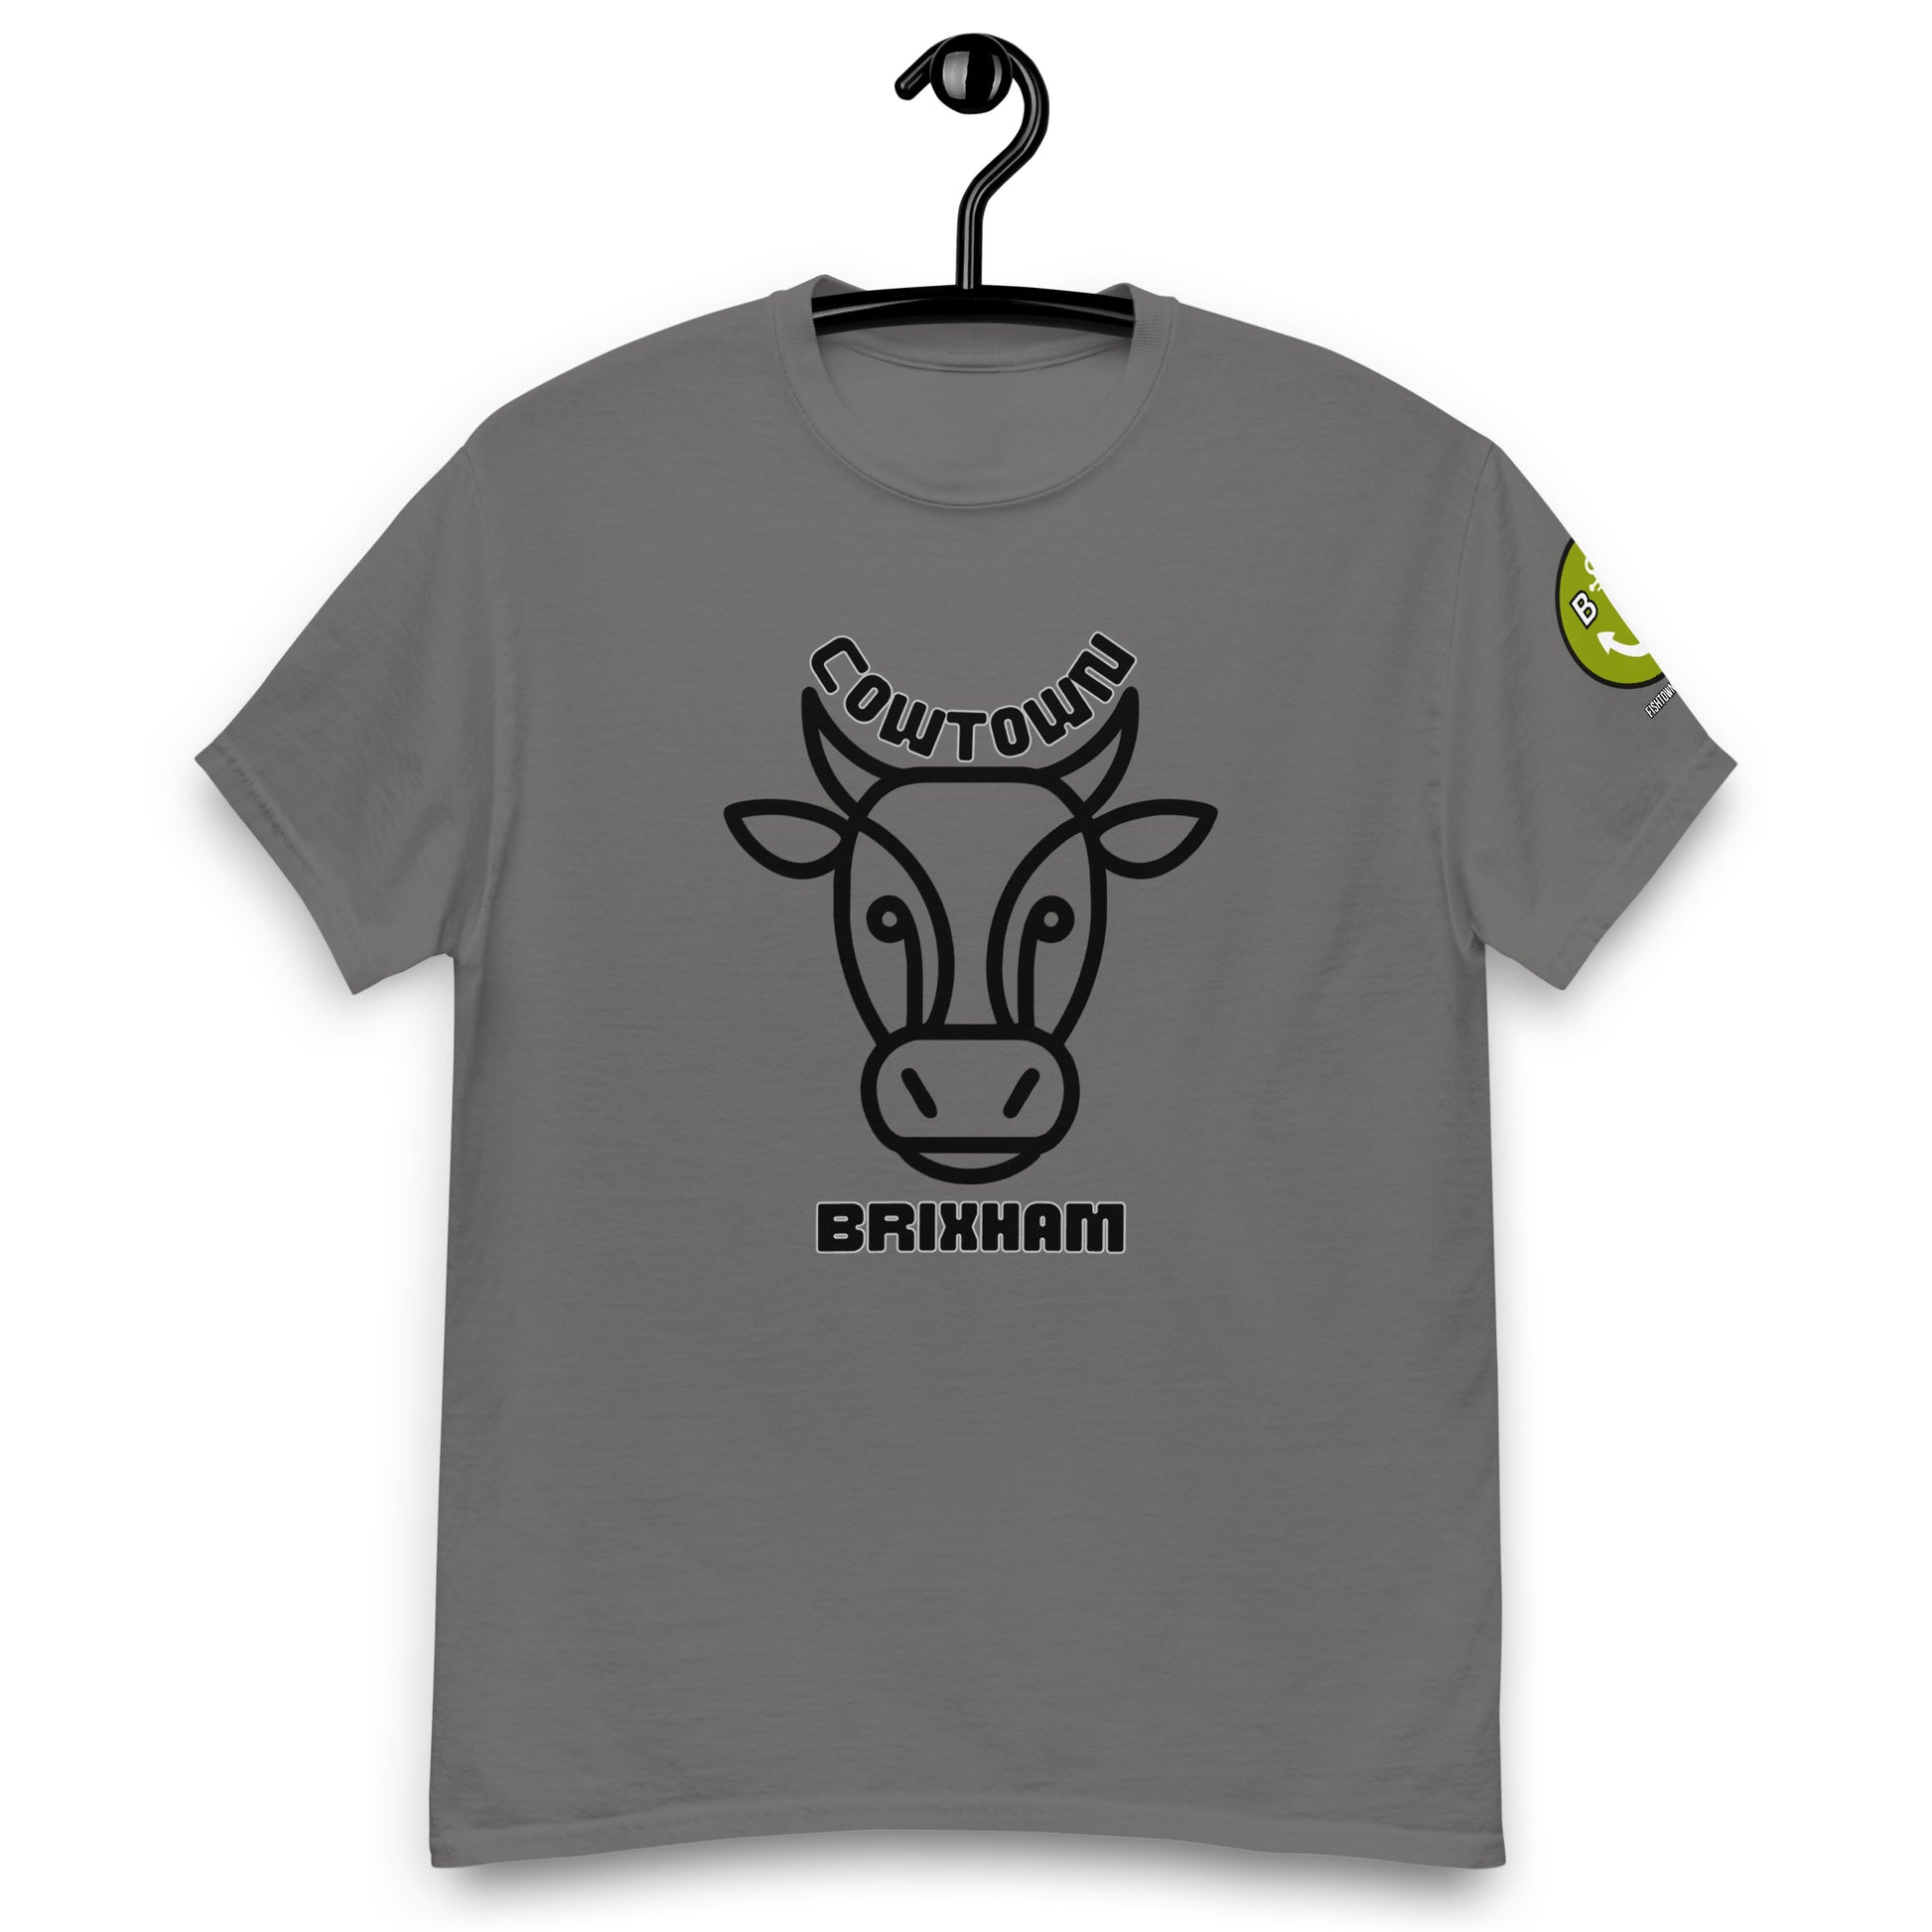 BRIXHAM BM Cowtown Men's classic tee front with logo on left sleeve charcoal